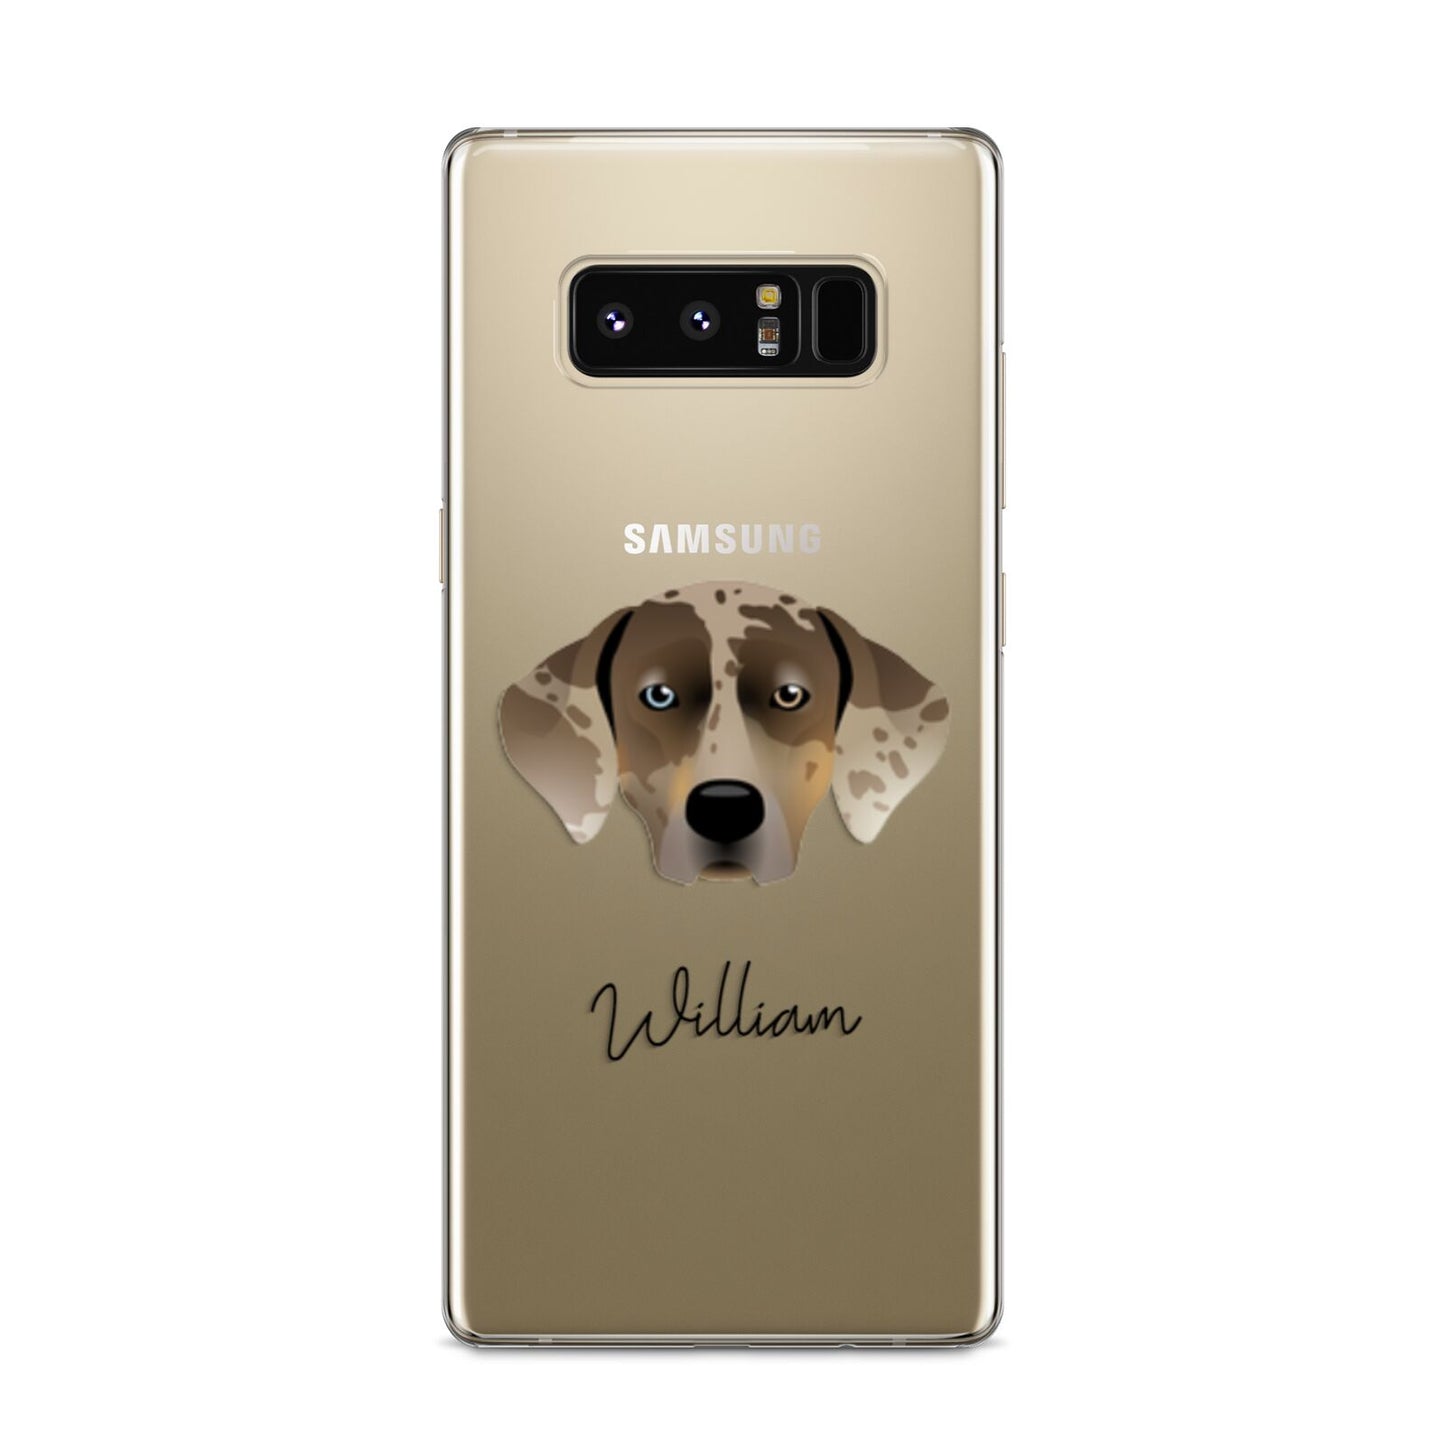 Catahoula Leopard Dog Personalised Samsung Galaxy S8 Case